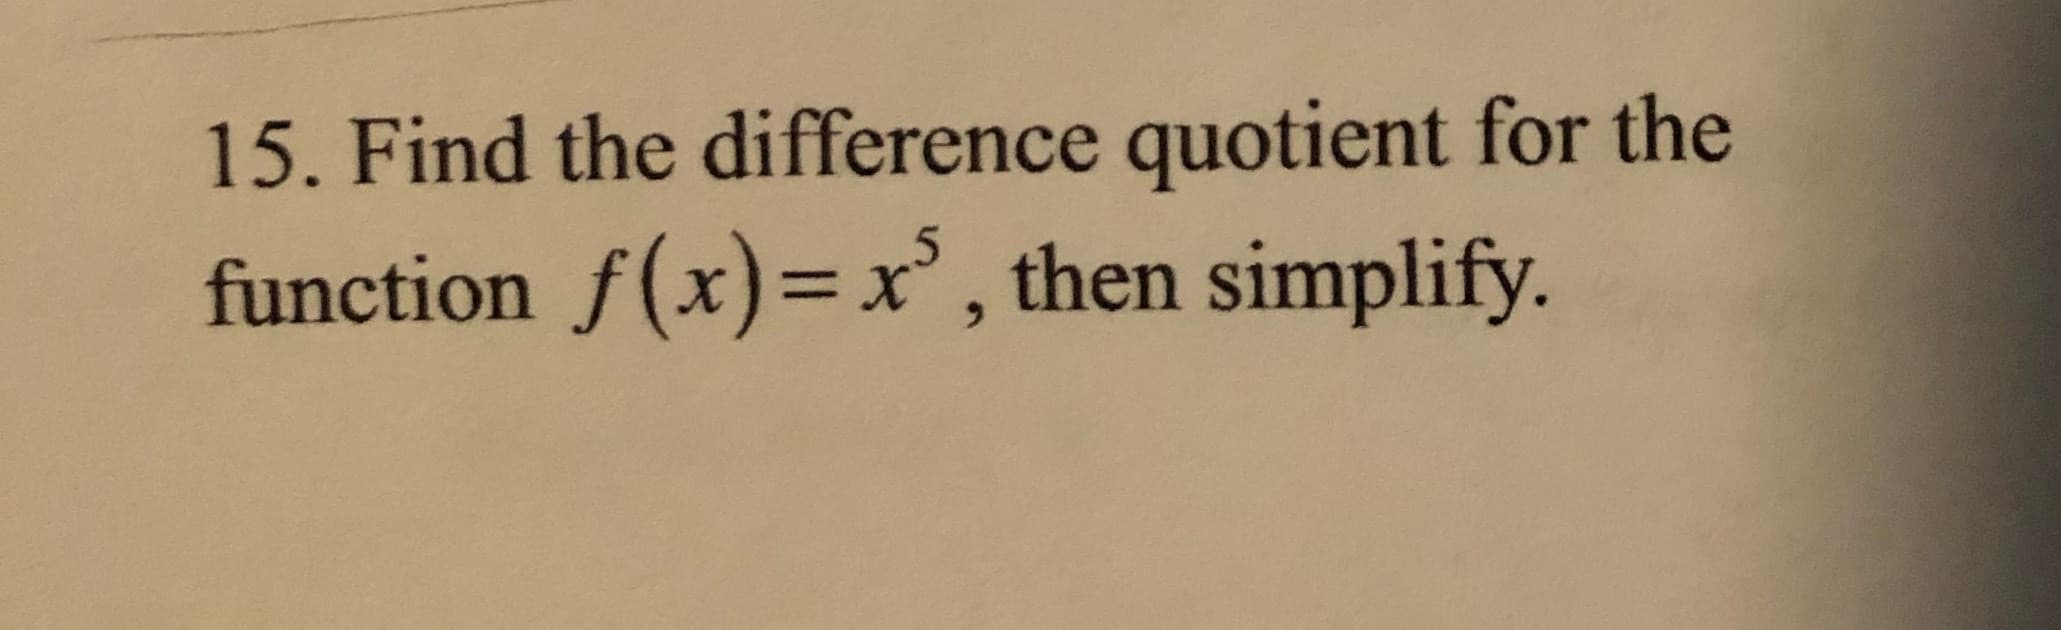 15. Find the difference quotient for the
function f(x)=x', then simplify.
